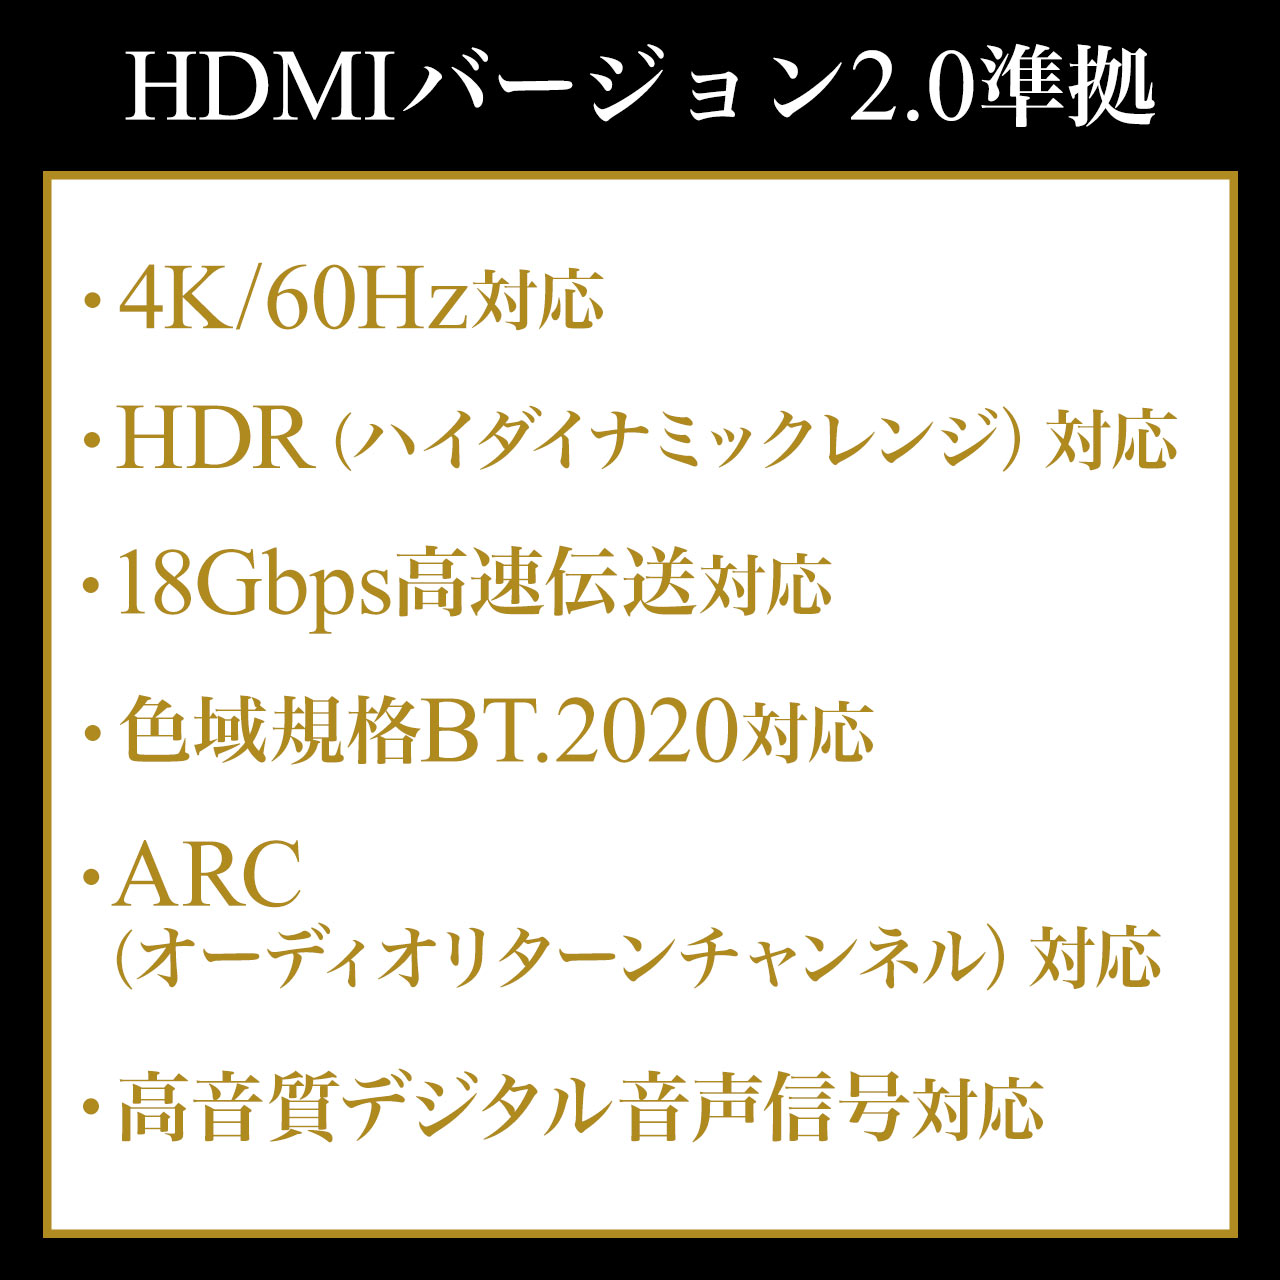 HDMIt@CoP[uiHDMIP[uE4K/60HzE18GbpsEHDRΉEo[W2.0iE15mEubNj 500-HD021-15